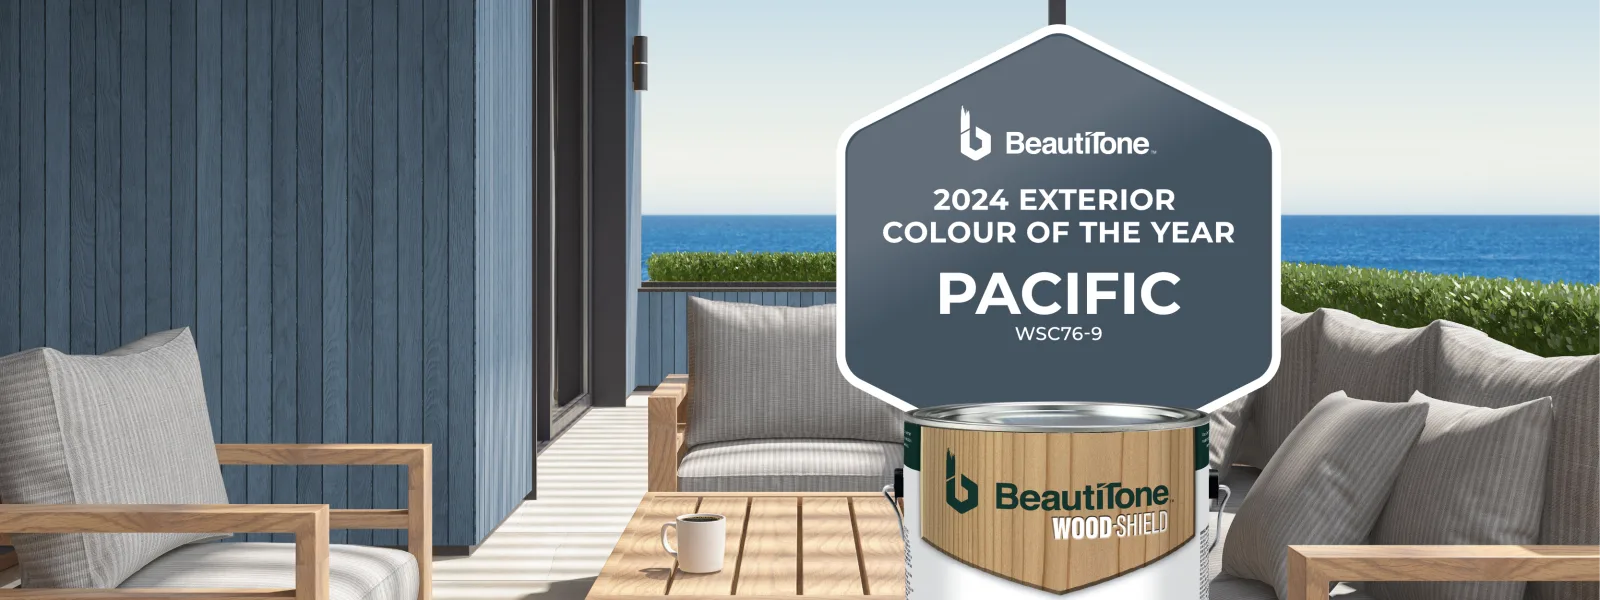 2024 Exterior Colour of the Year Pacific